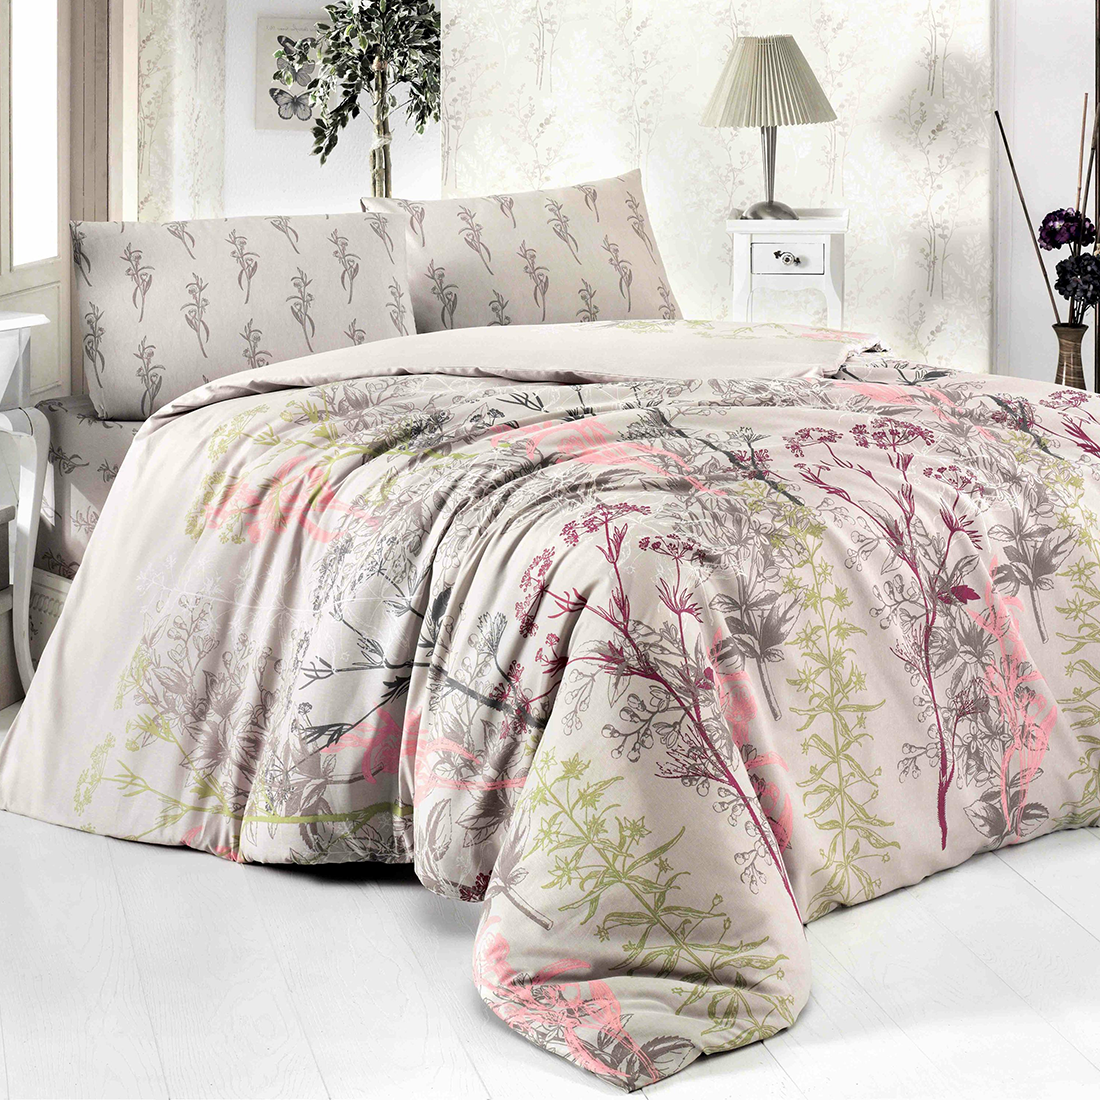 Lenjerie Home Berry 2 persoane, 200x220 cm, Floral